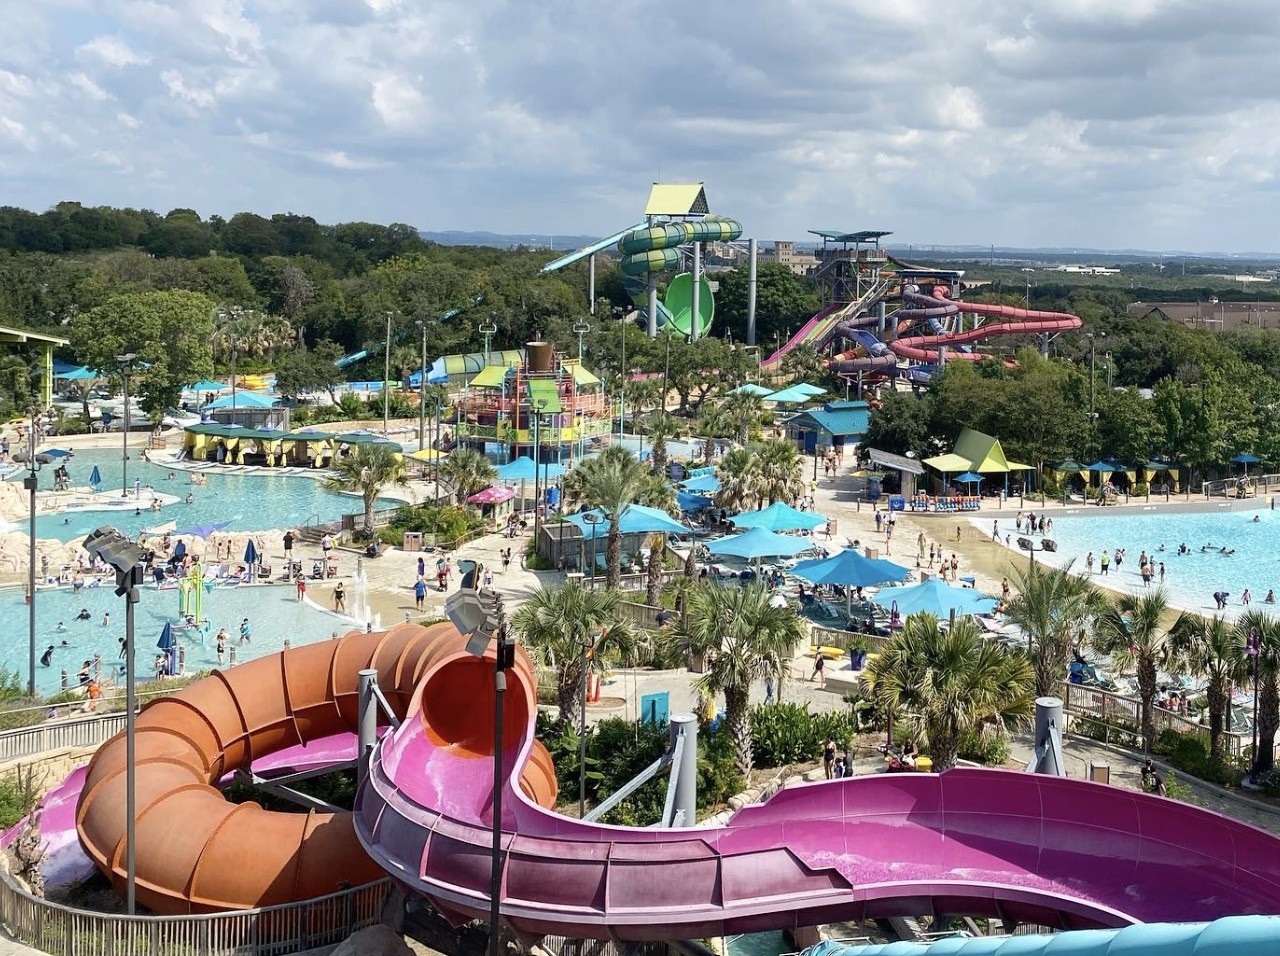 Top 10 Amusement Parks within driving distance of Houston